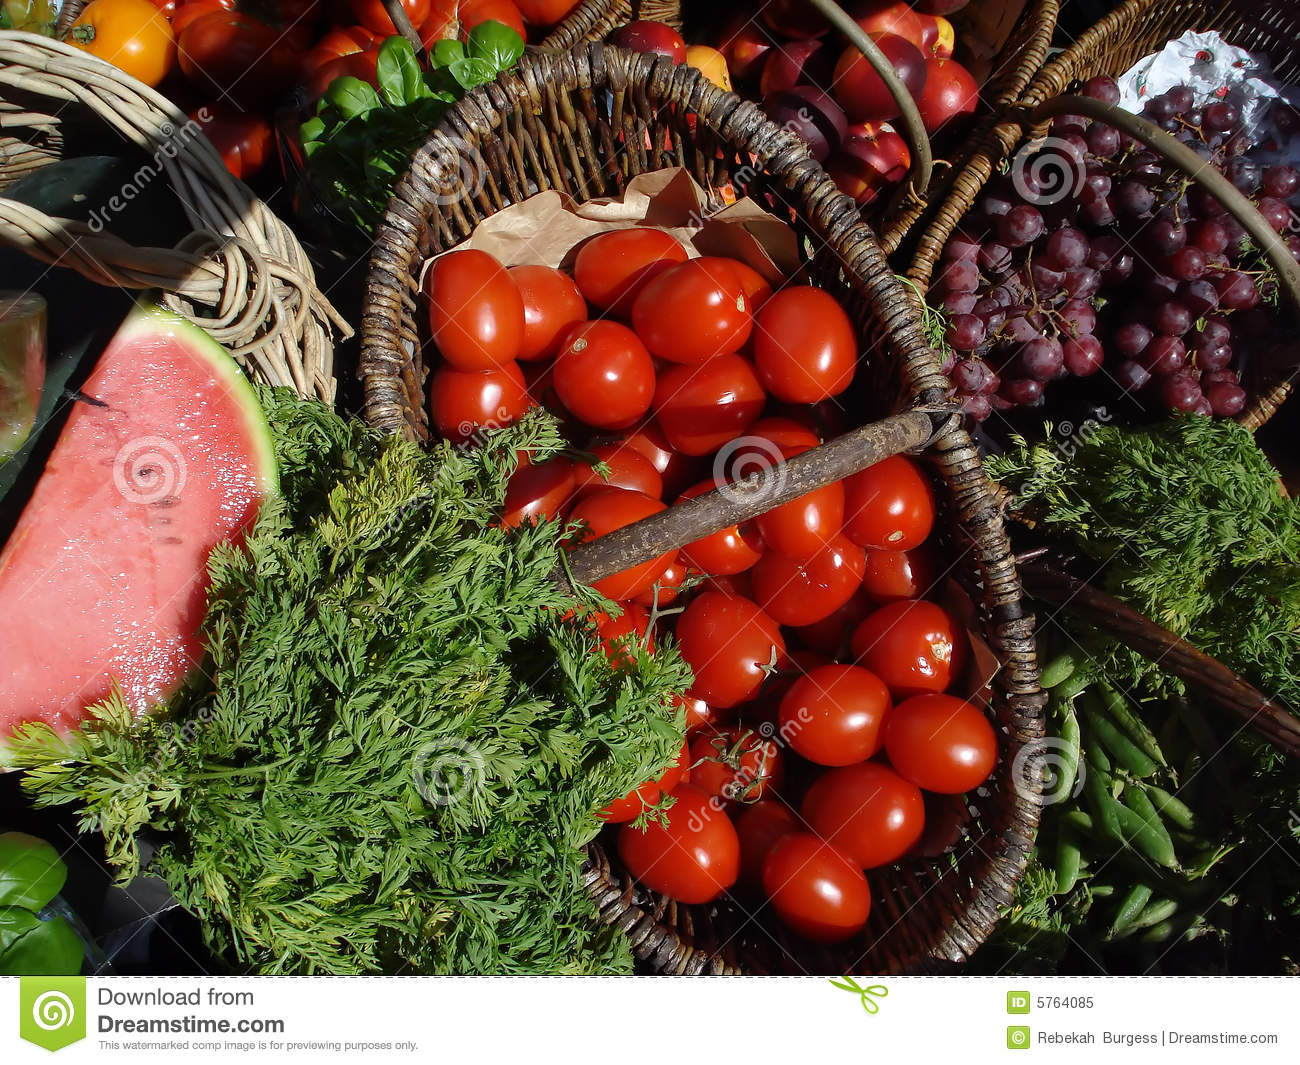 Fruits And Vegetables Photos Download